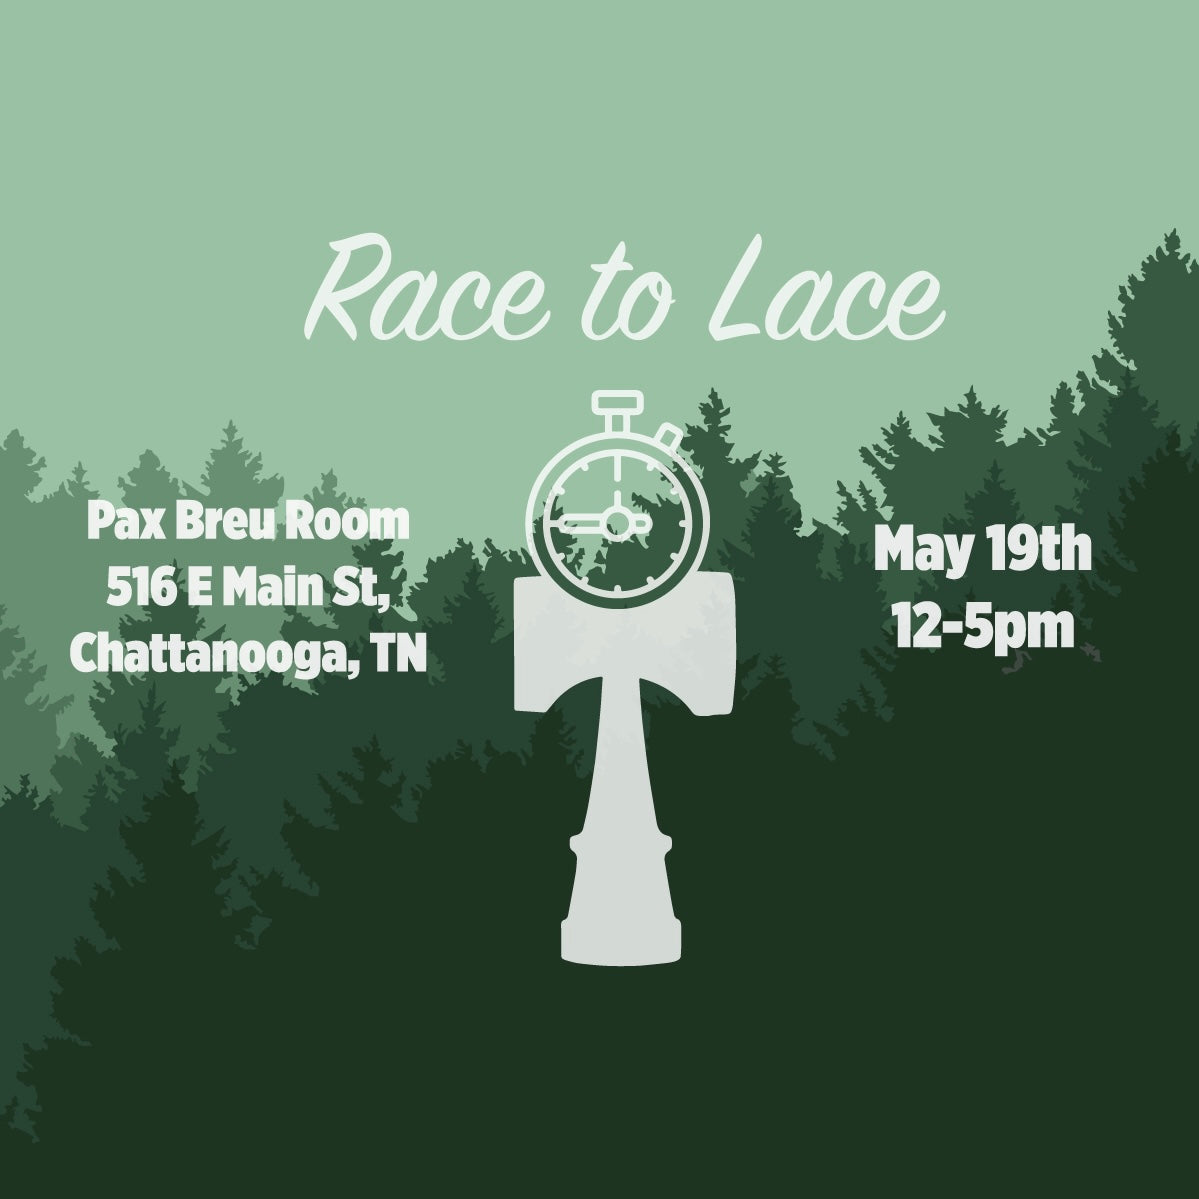 Chattanooga's Premier Kendama Event - Race to Lace